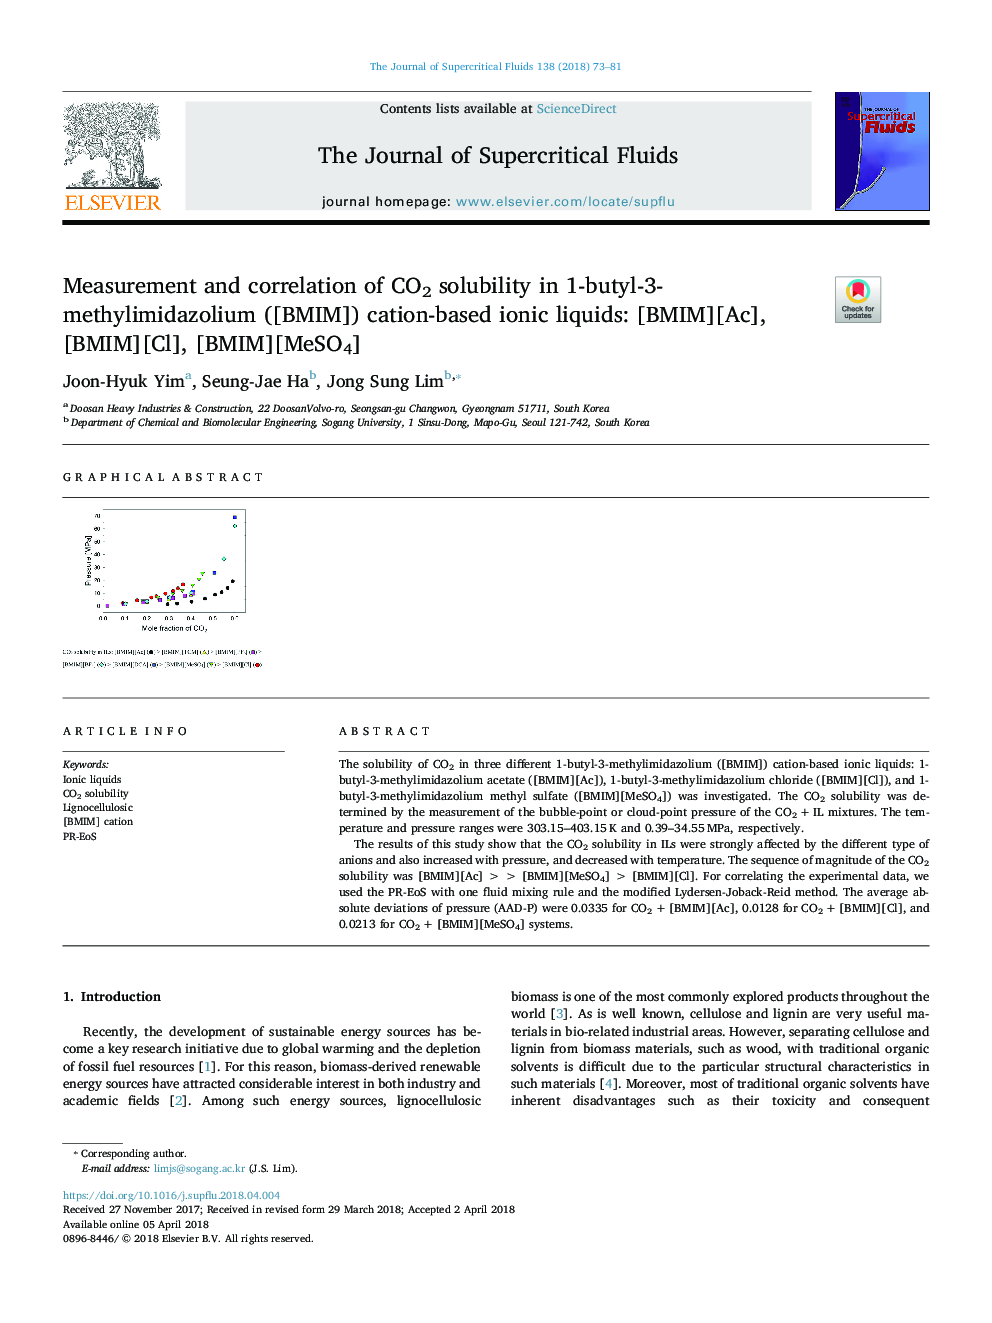 Measurement and correlation of CO2 solubility in 1-butyl-3-methylimidazolium ([BMIM]) cation-based ionic liquids: [BMIM][Ac], [BMIM][Cl], [BMIM][MeSO4]